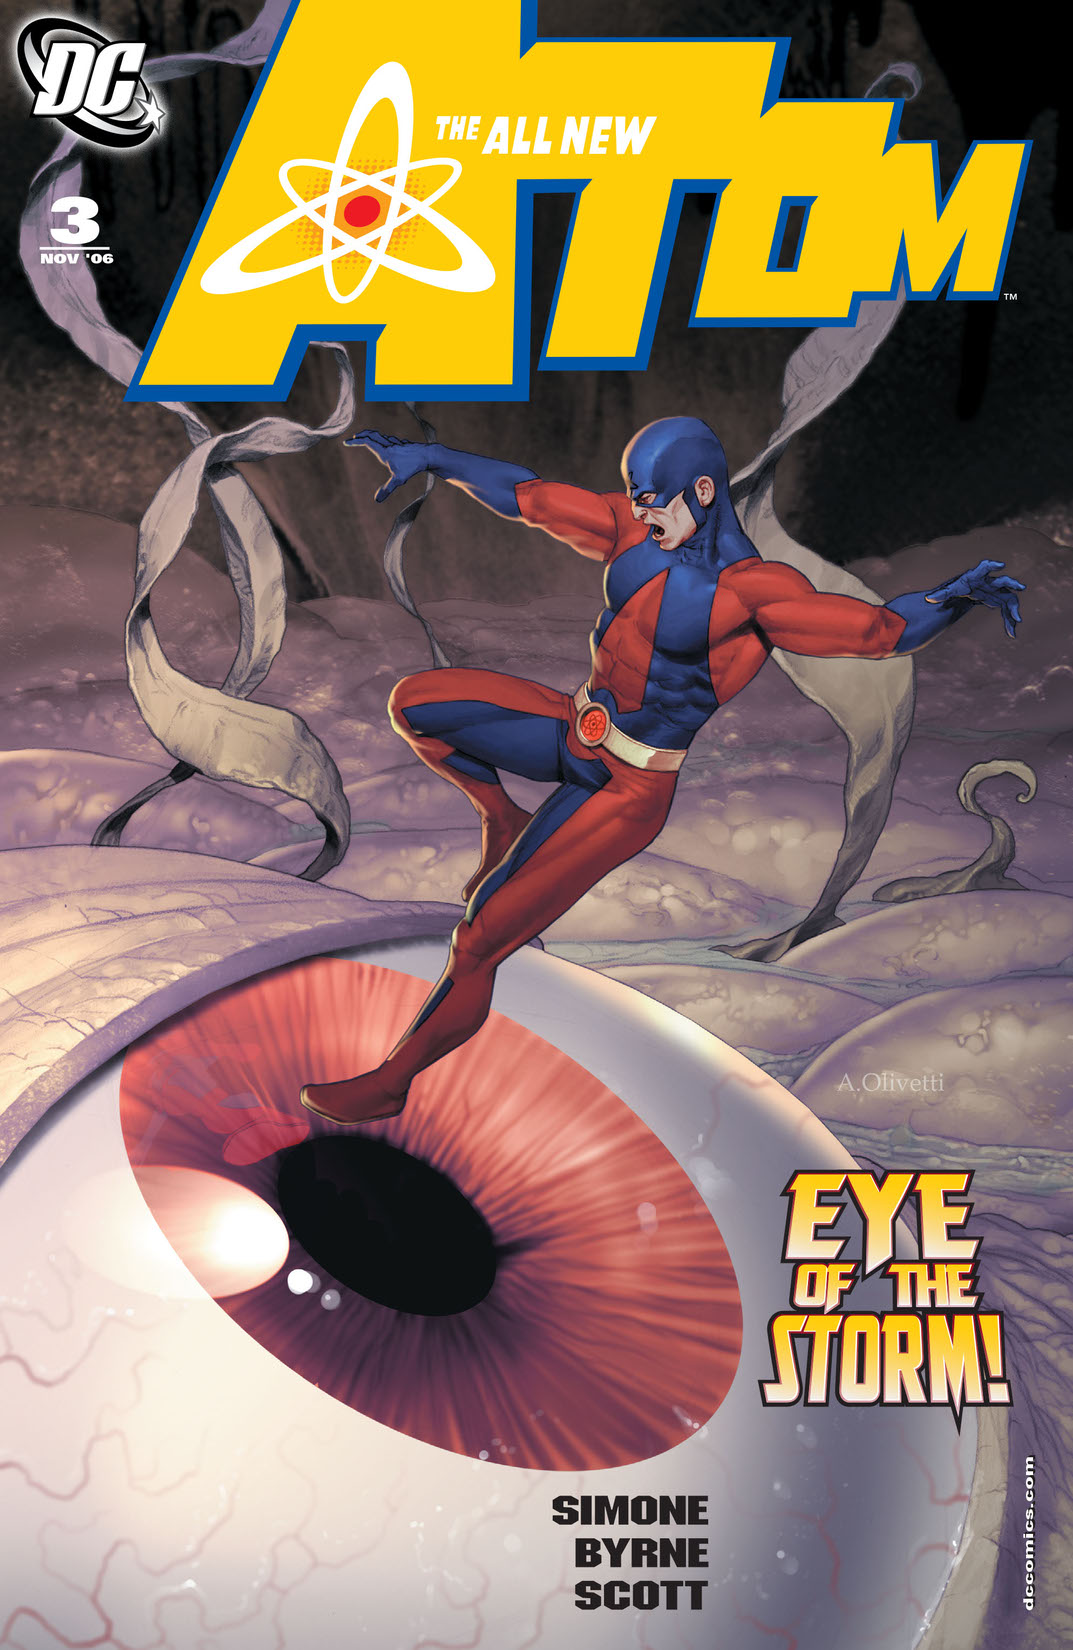 The All New Atom #3 preview images